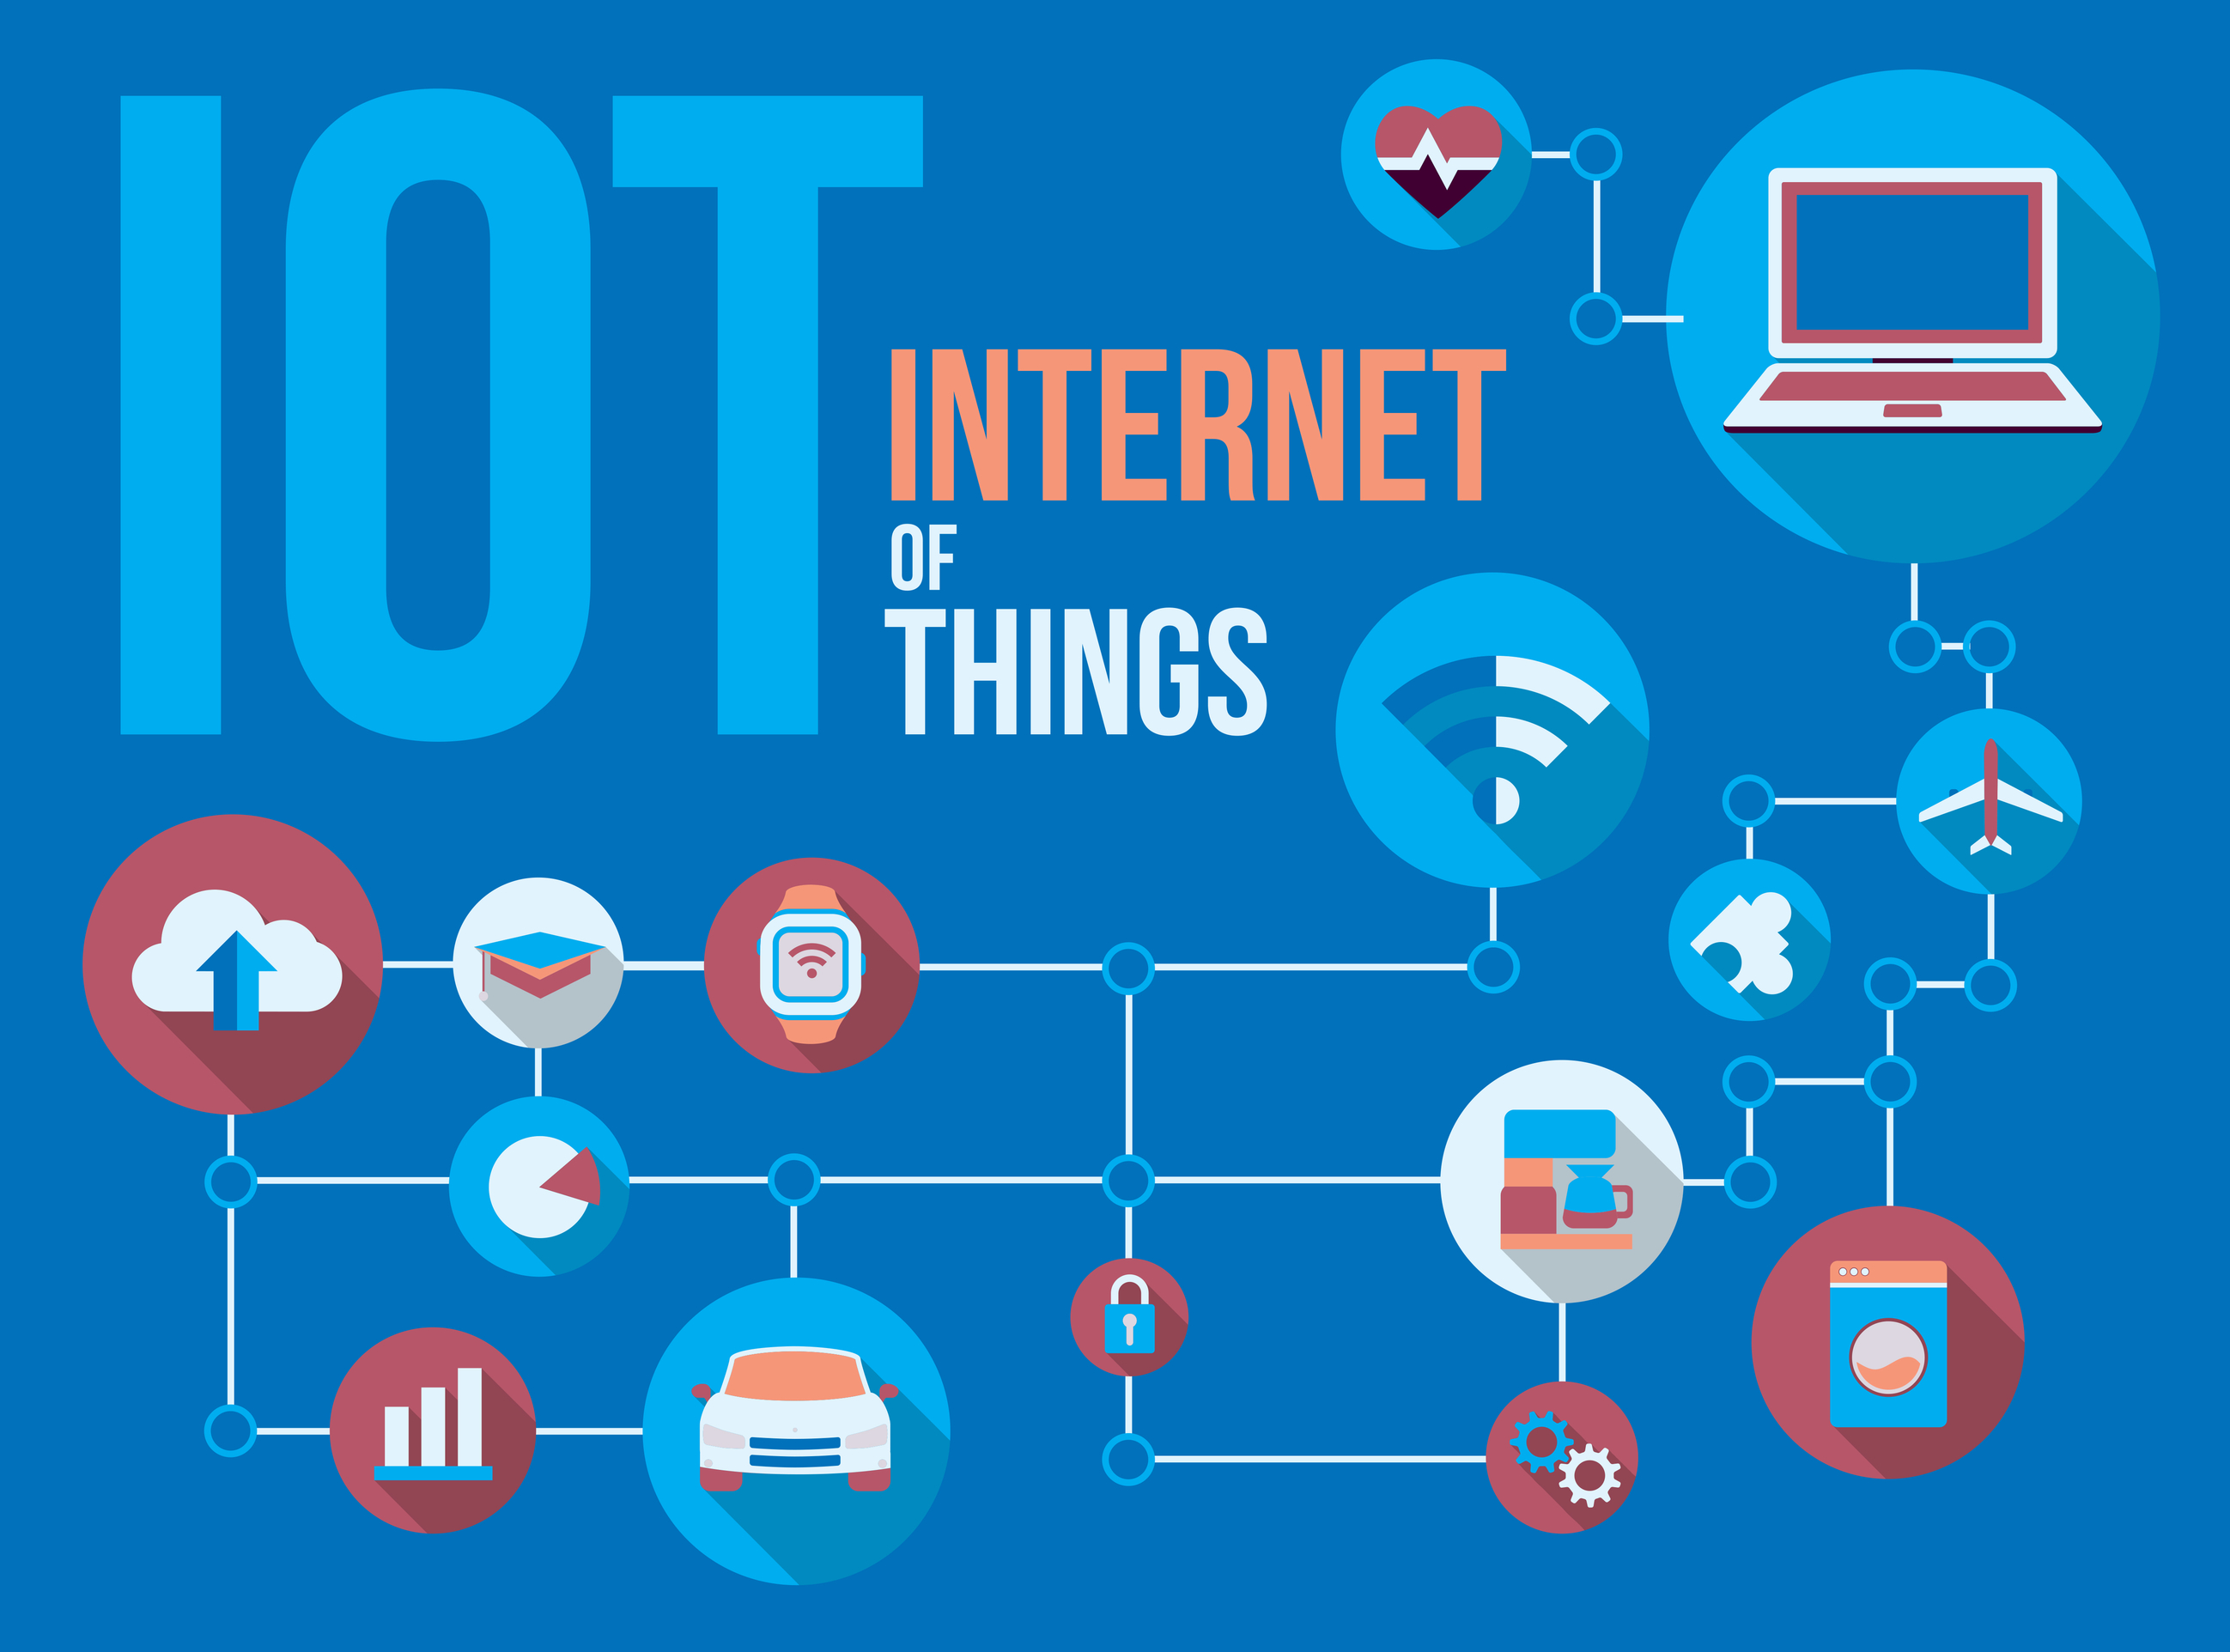 Trends in the Consumer Internet of Things (CIoT) market